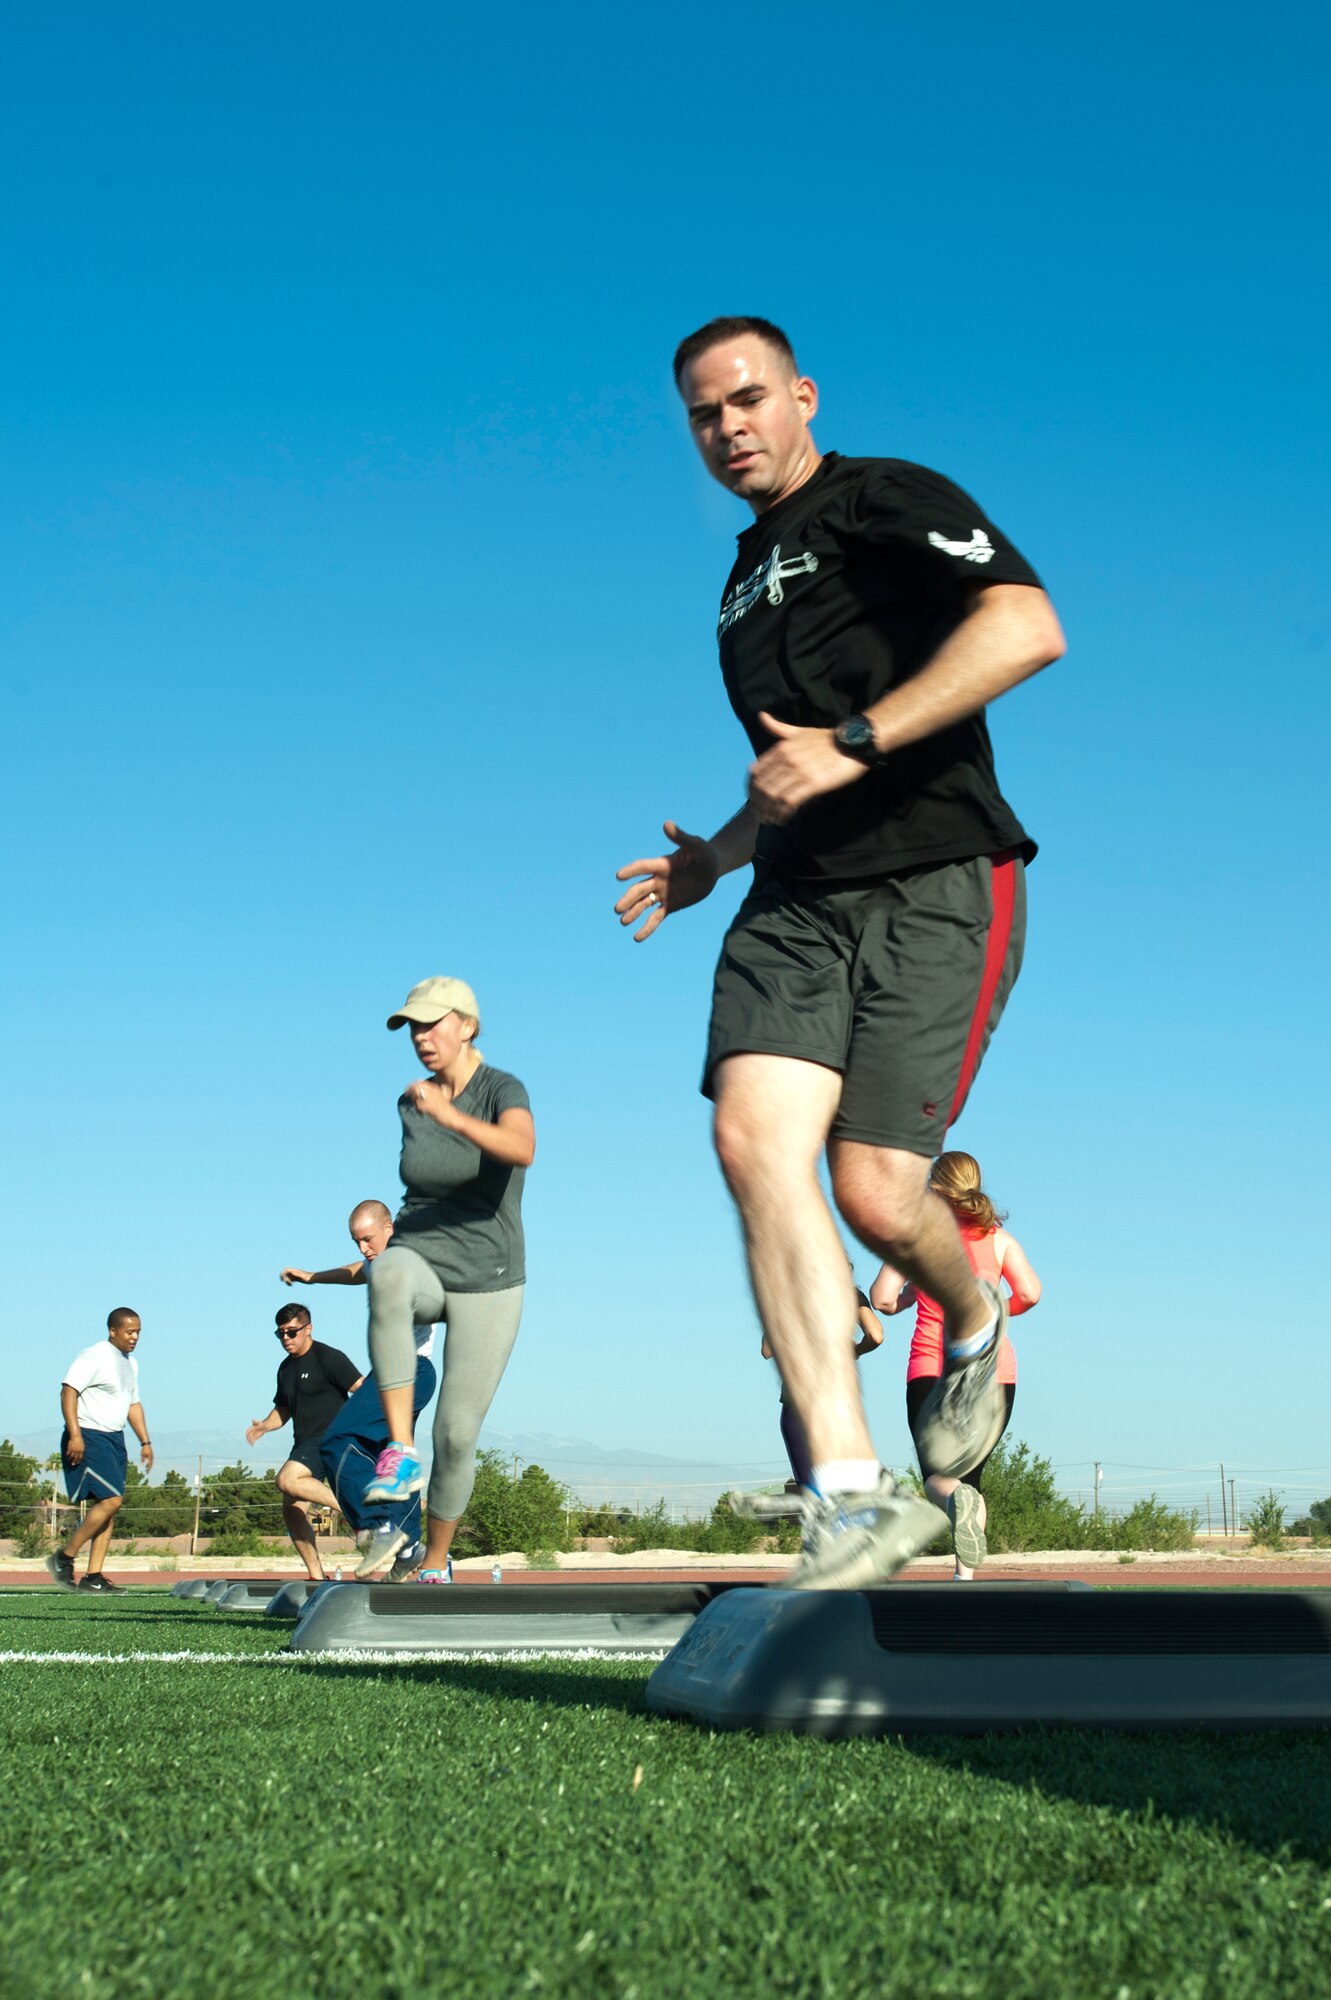 Participants maneuver over aerobic steps as part of the Warrior Trained Fitness exercise session at the Warrior Fitness Center June 12, 2014, at Nellis Air Force Base, Nev. Continuous movement between exercises builds up cardiovascular strength and endurance. (U.S. Air Force photo by Senior Airman Timothy Young)